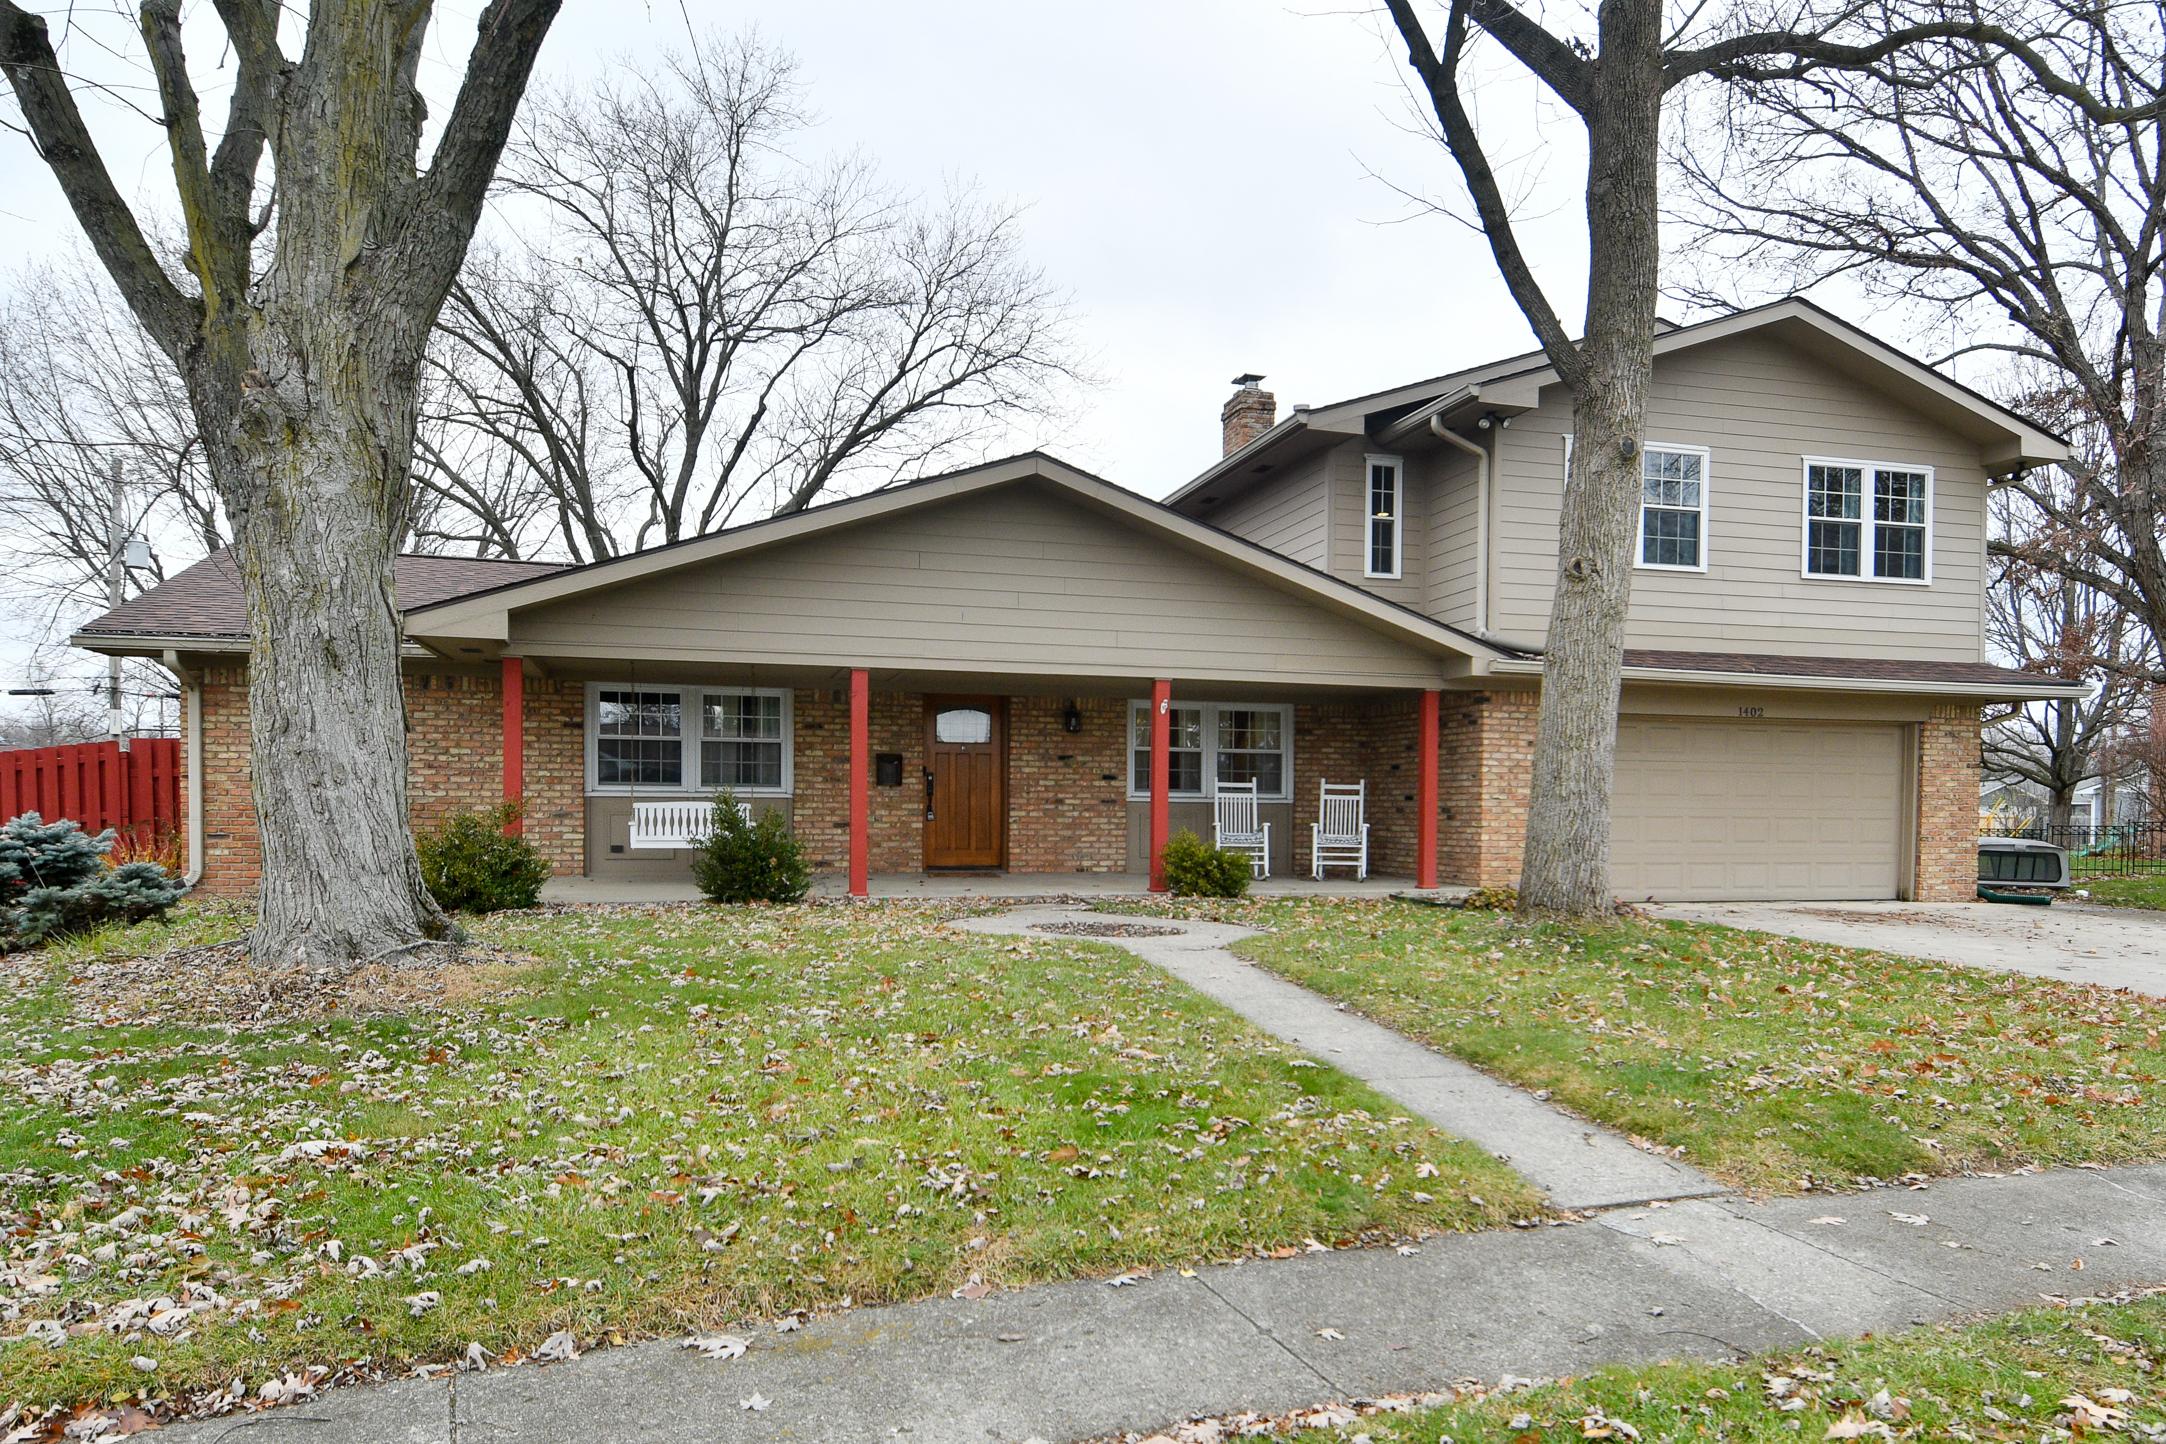 Photo one of 1402 Miami N Ct Plainfield IN 46168 | MLS 21955069